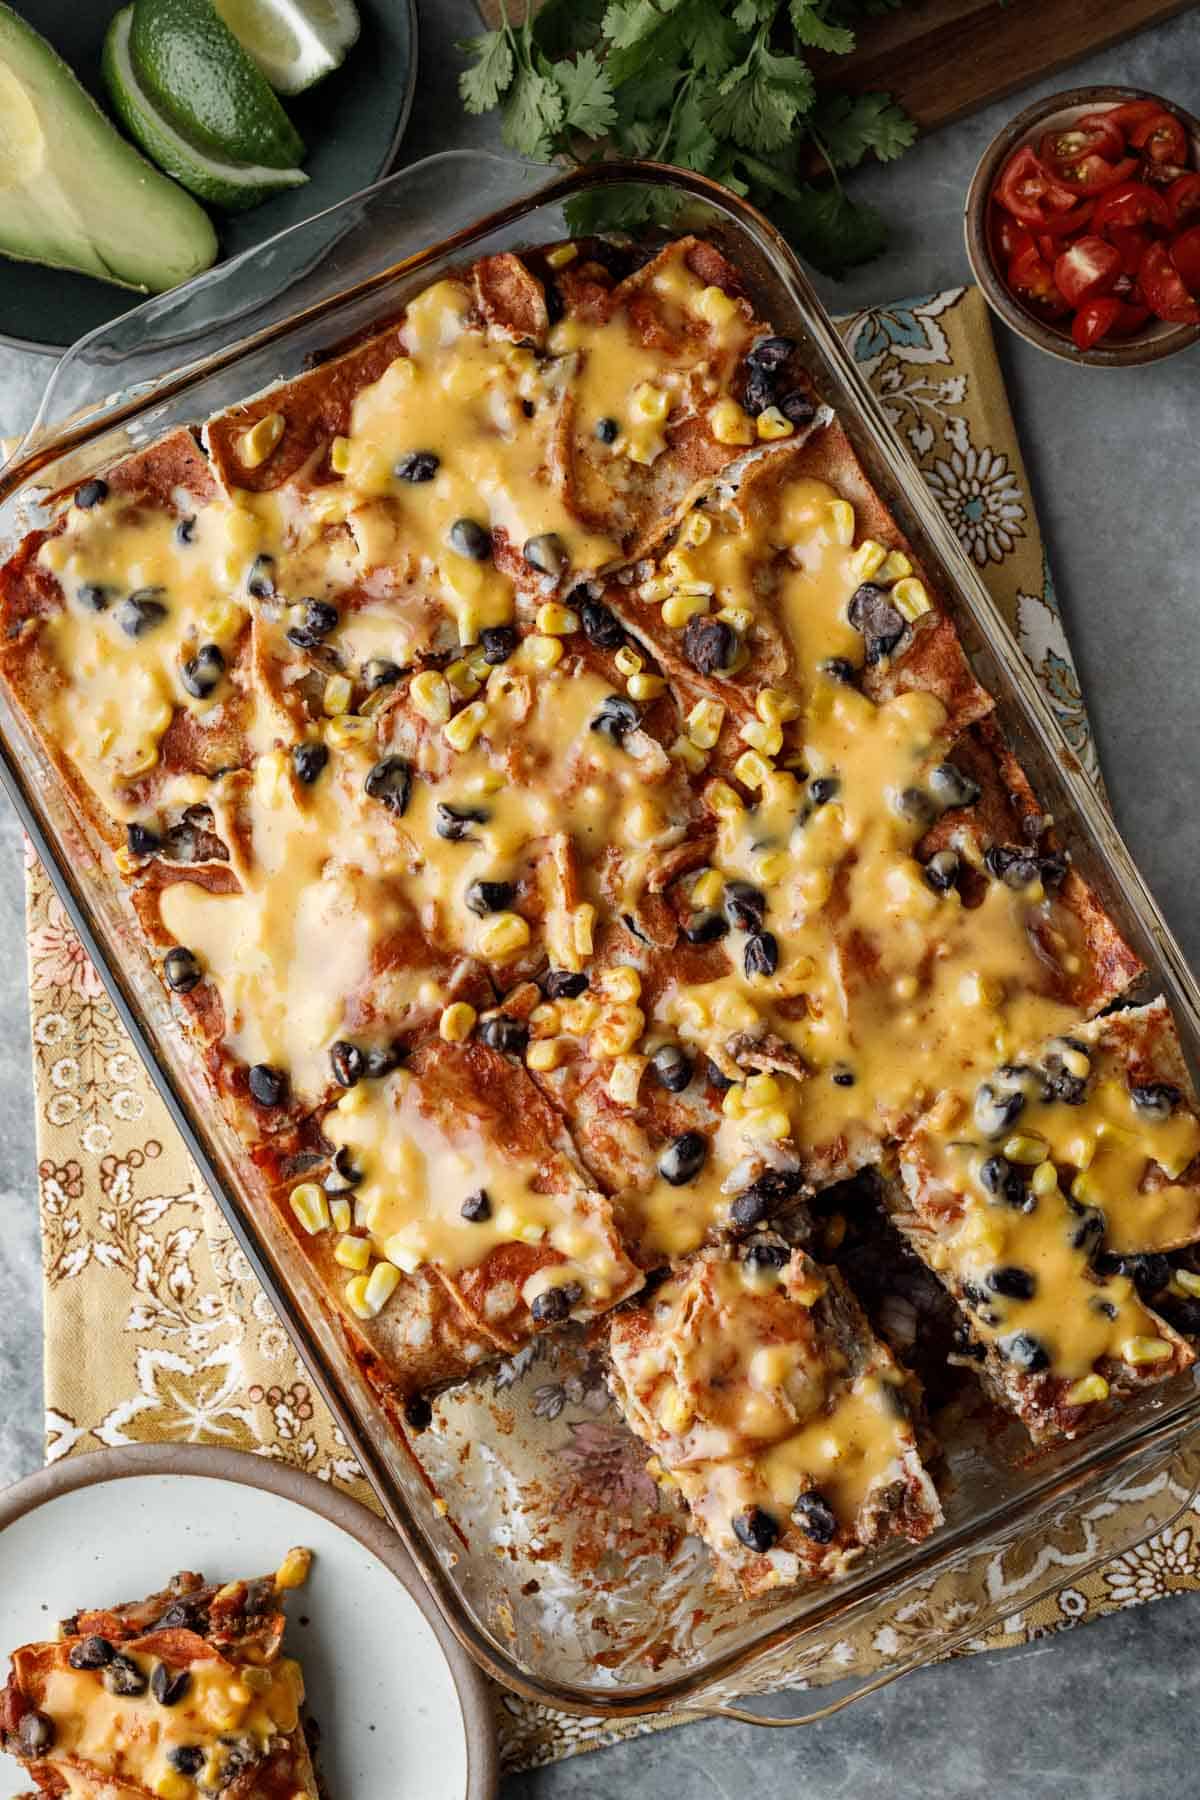 Cheesy vegan enchilada casserole in a glass dish with a serving on a plate.